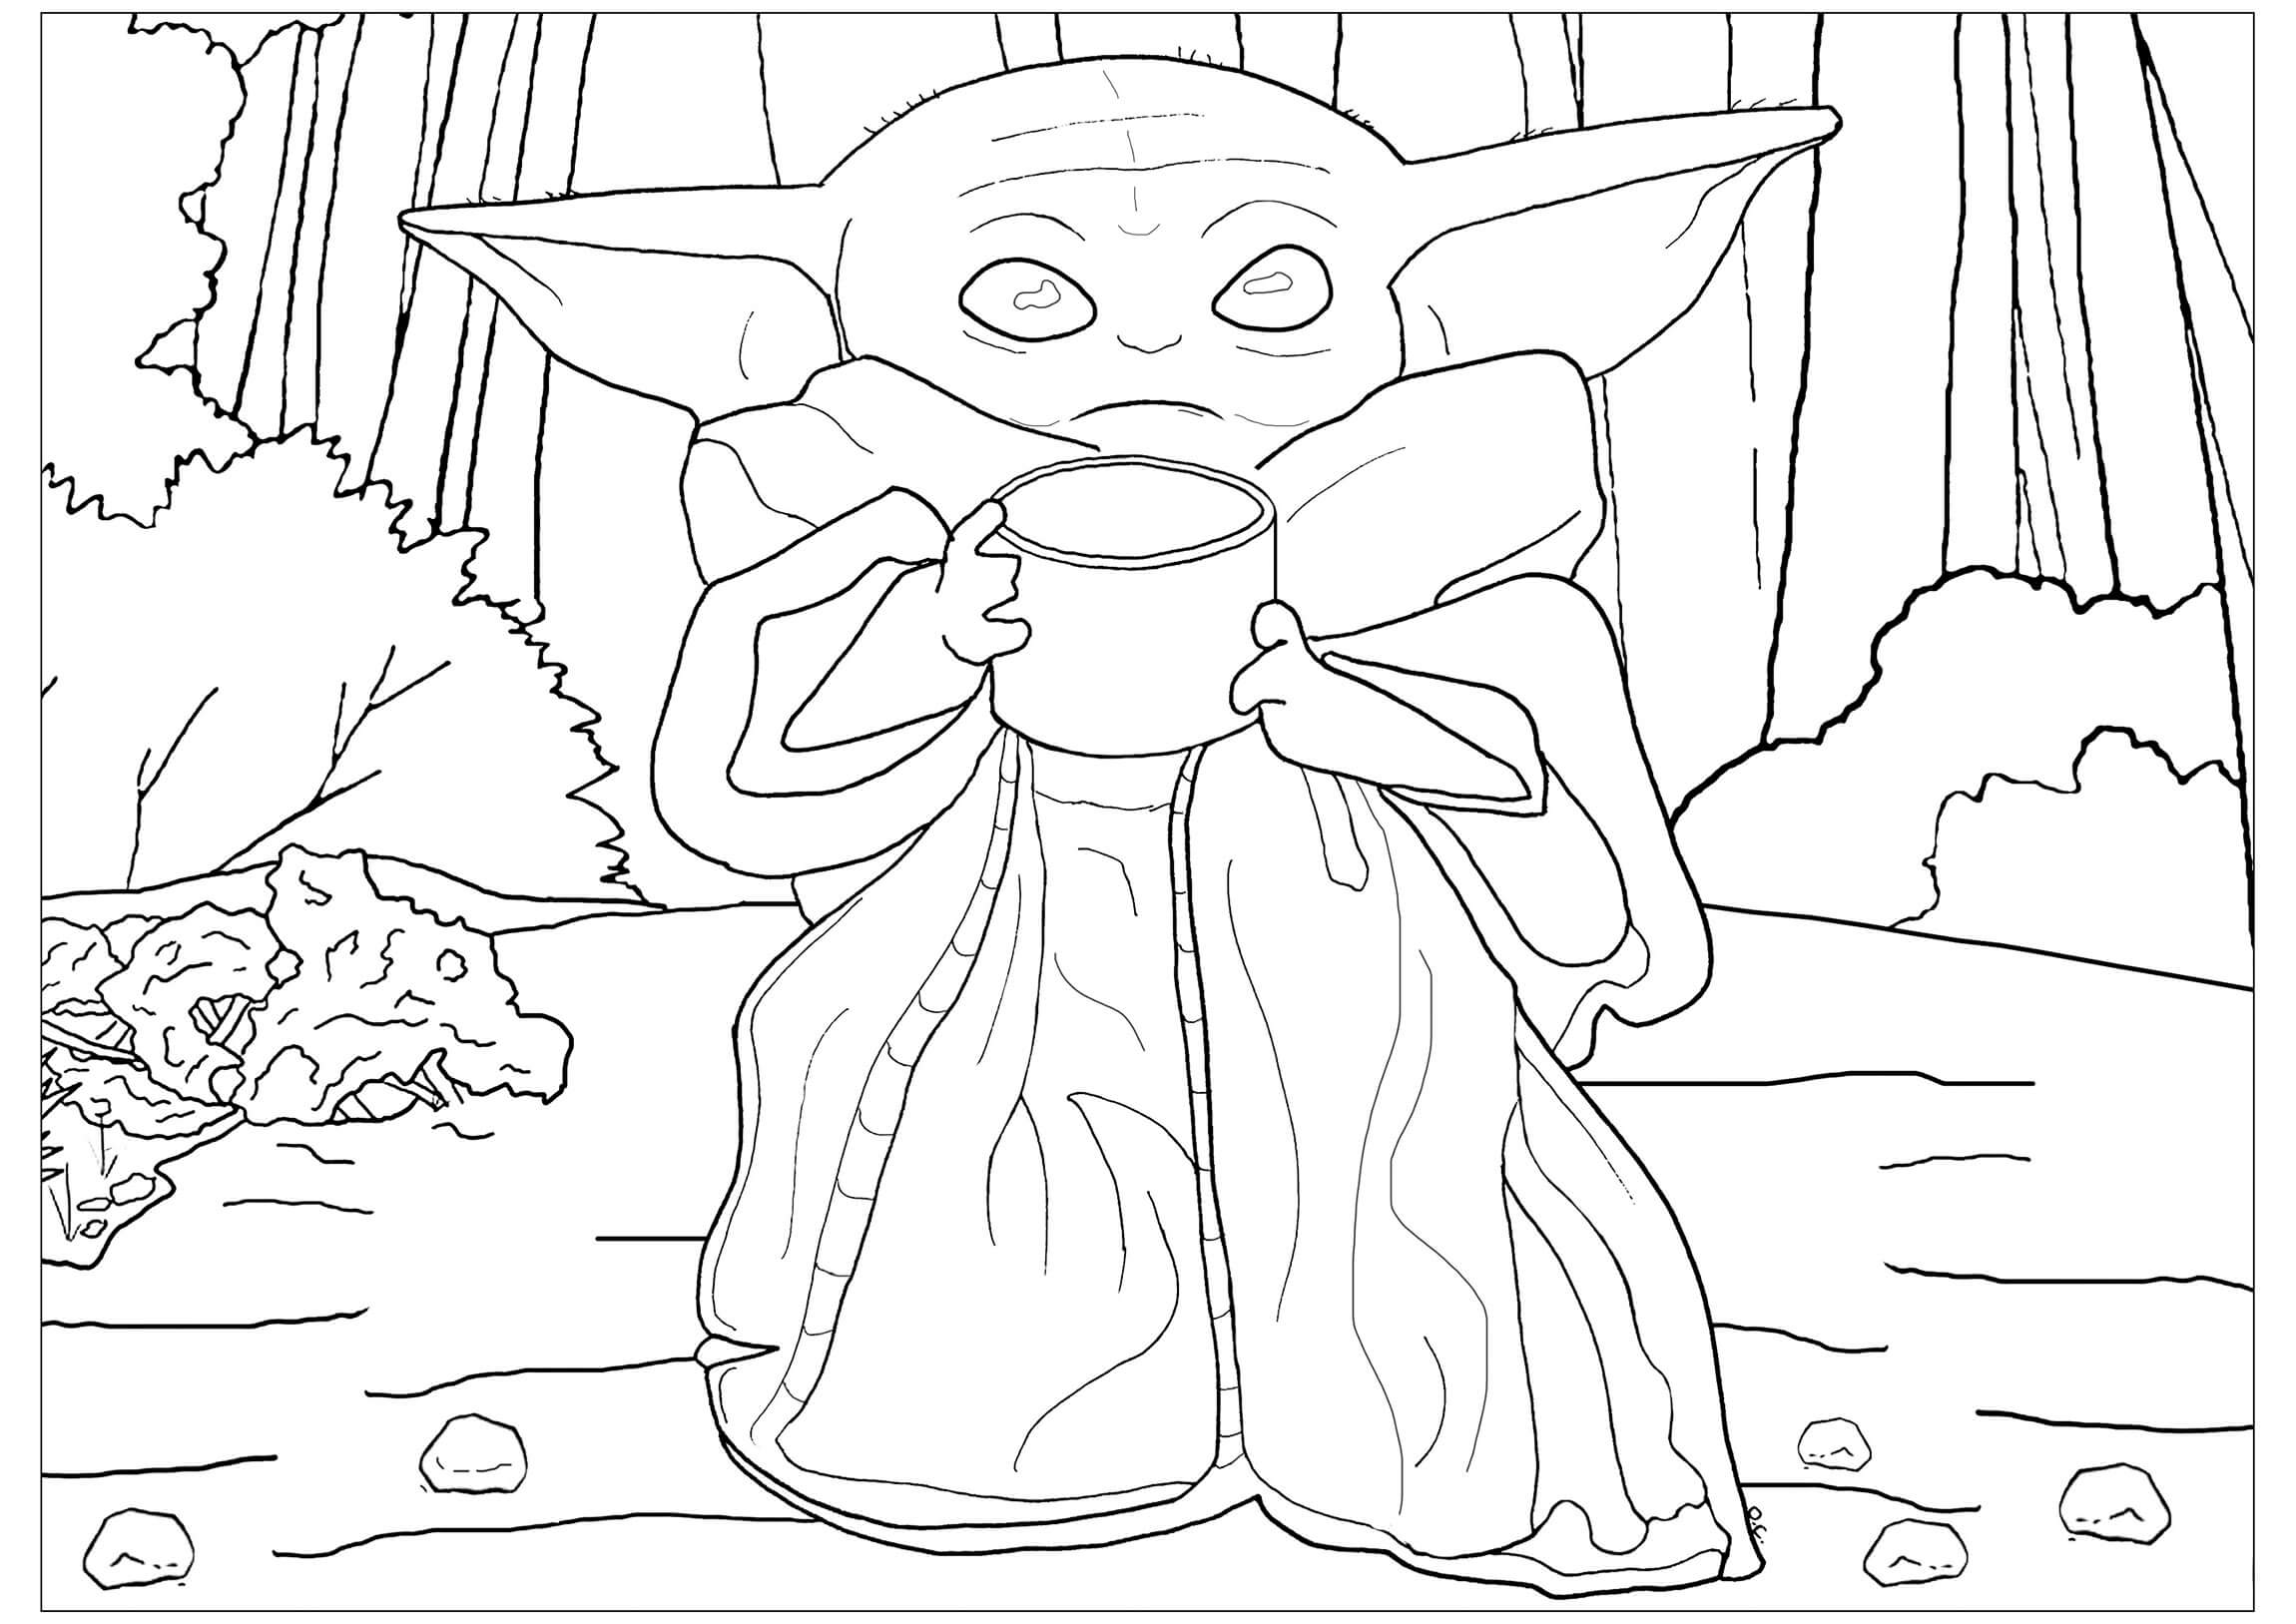 Baby Yoda Drinking Water in the Forest